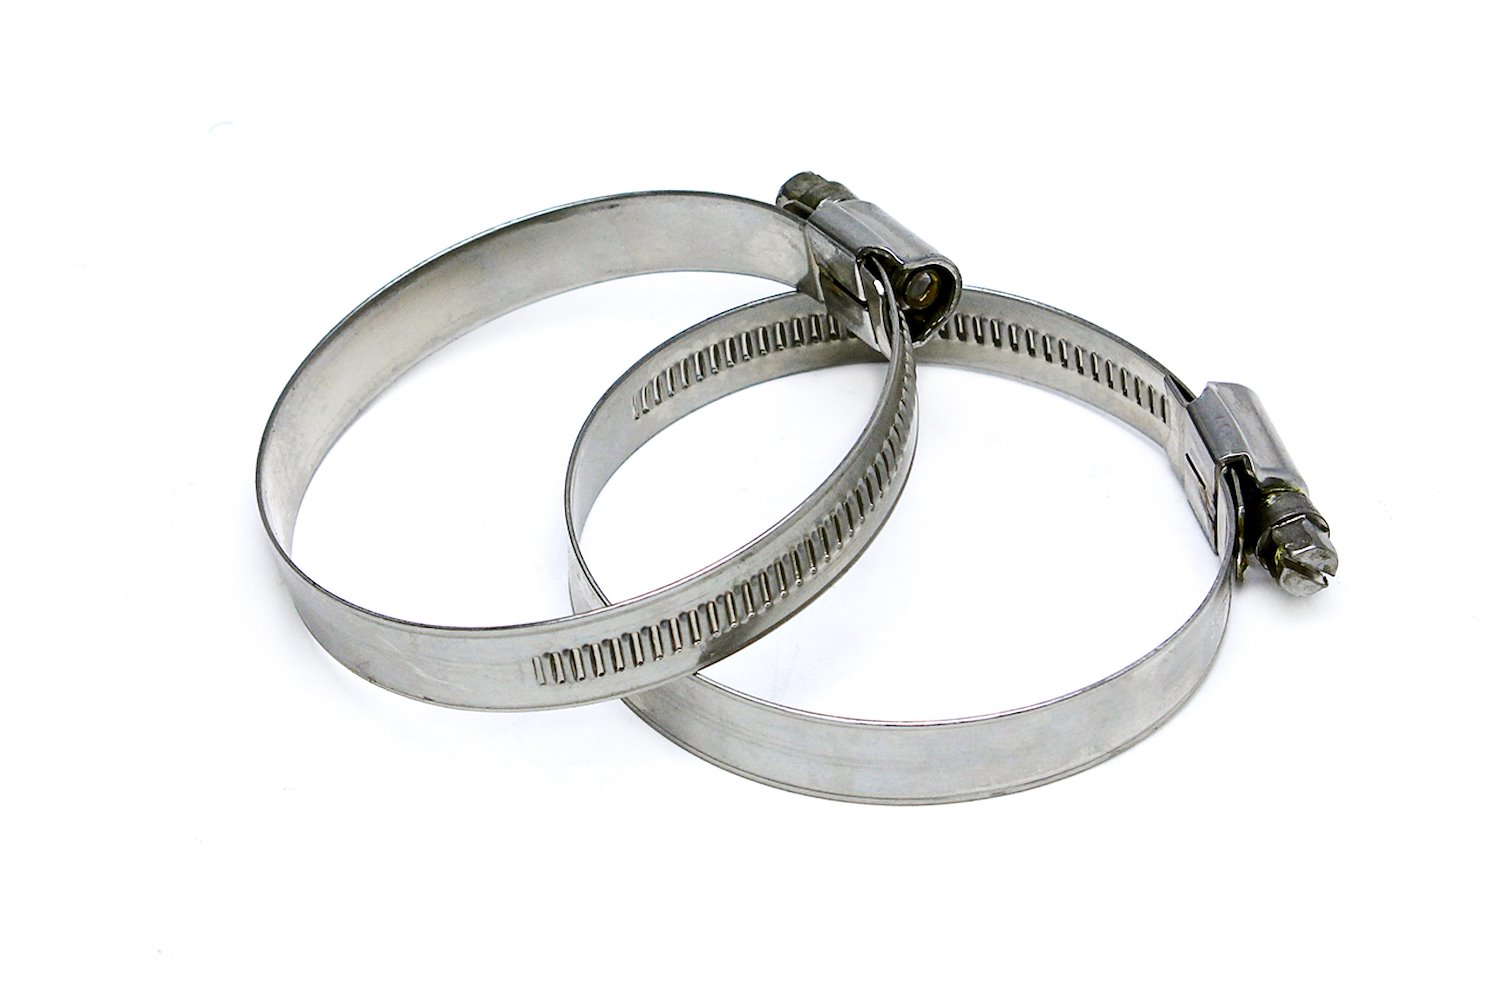 EMSC-130-150x2 Embossed Hose Clamp, Stainless Steel Embossed Hose Clamp, Size #88, Effective Range: 5-1/8 in.- 6 in., 2Pc